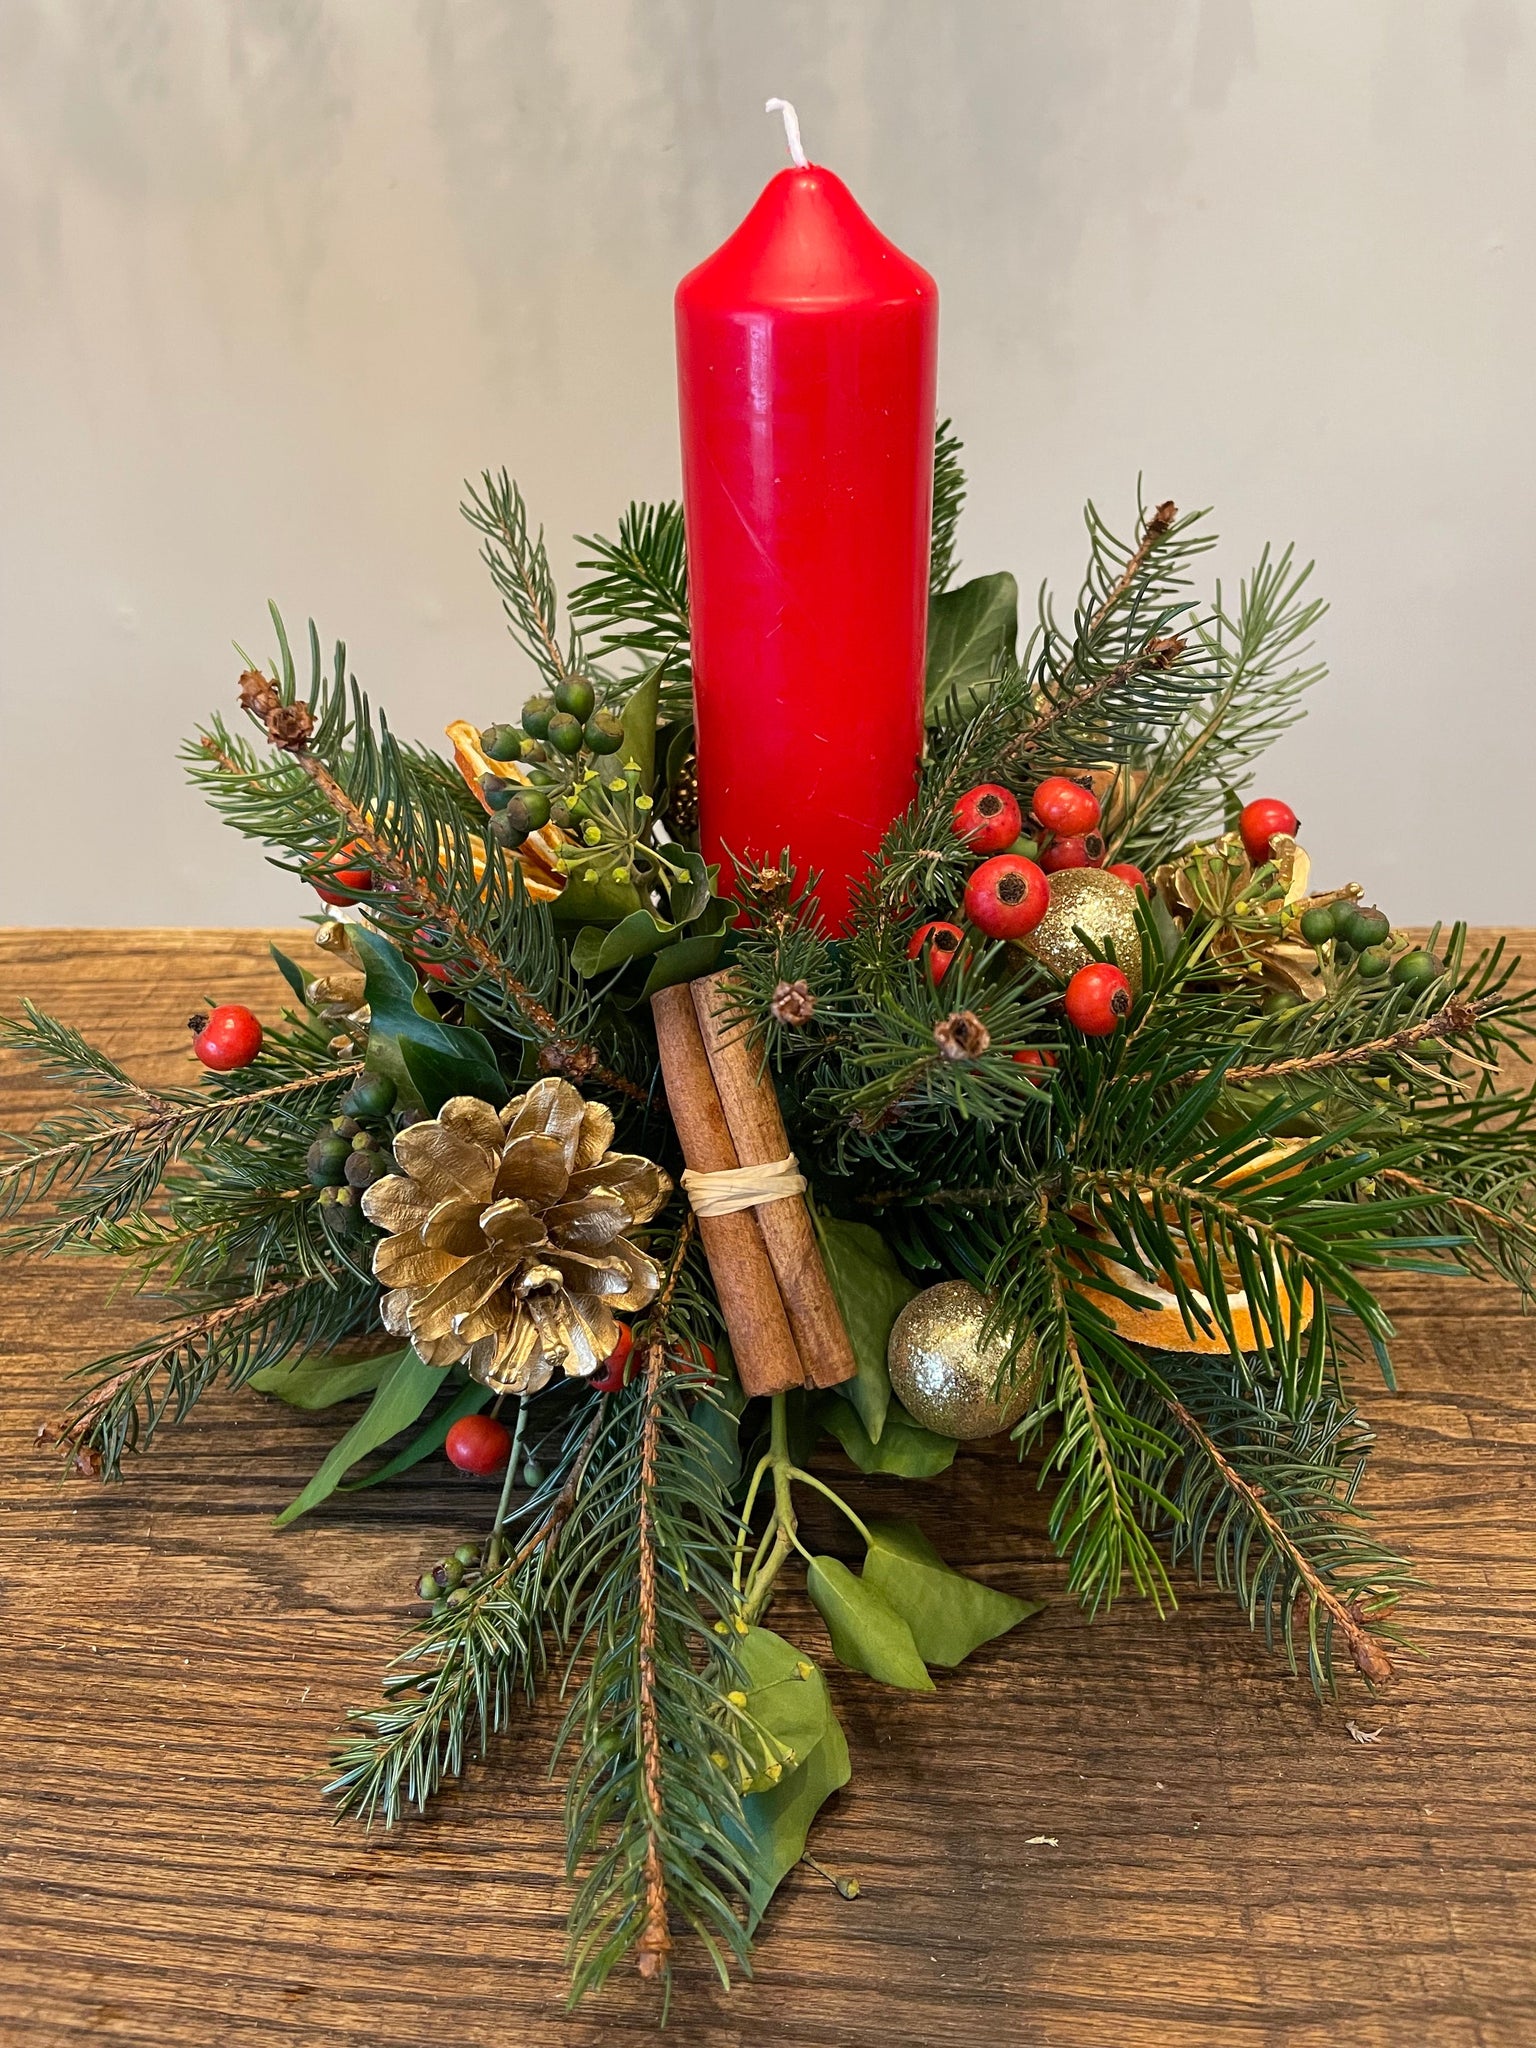 Christmas Table Centerpiece Workshop – Sunday 17th December, Starting @ 11am (£75 per person) 2 hours